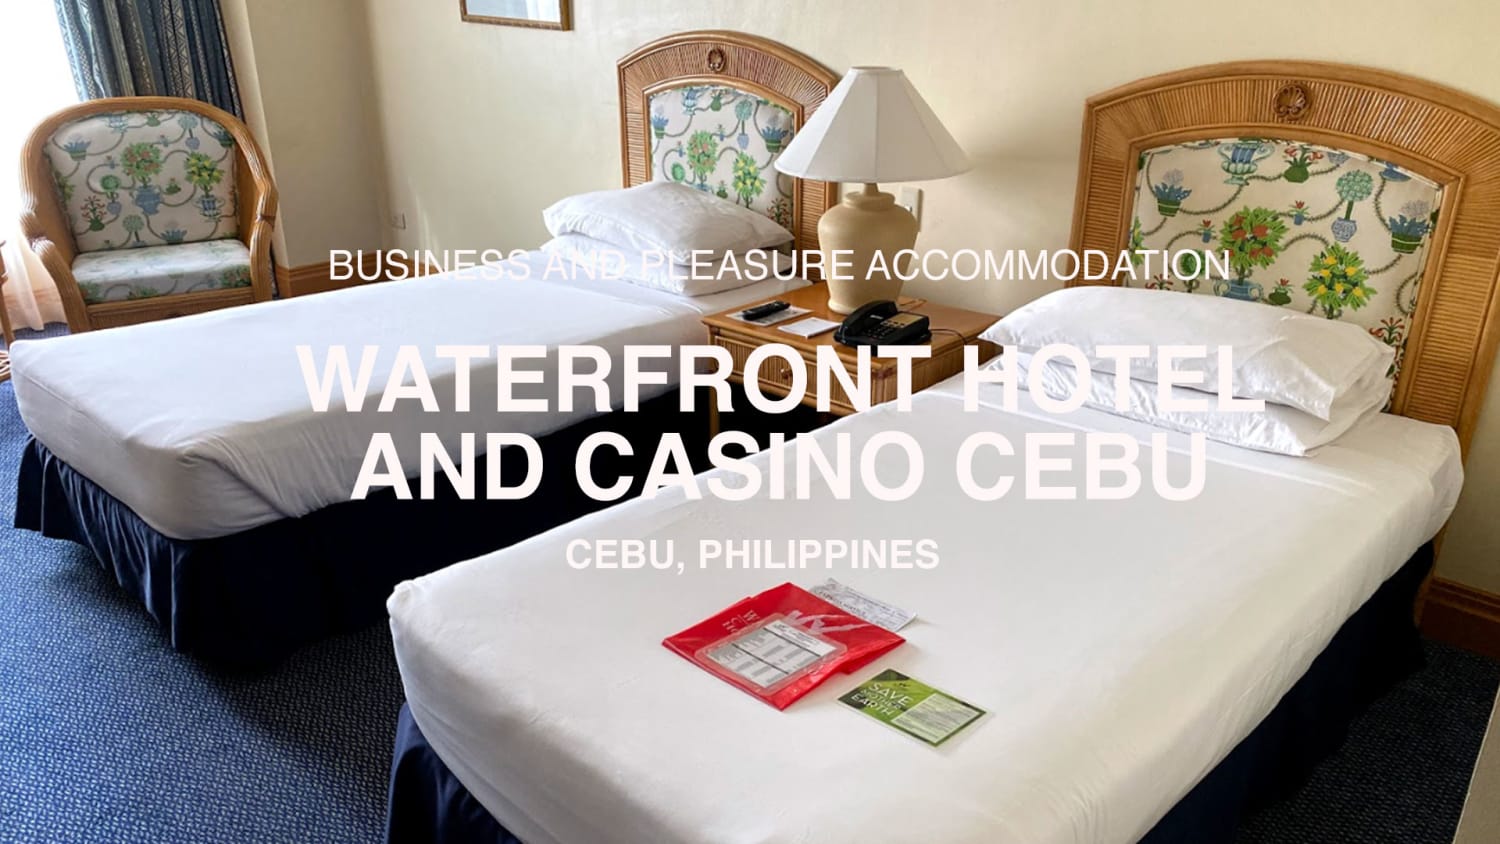 Business and Pleasure Accommodation in Cebu: A Review of the Waterfront Hotel and Casino Cebu